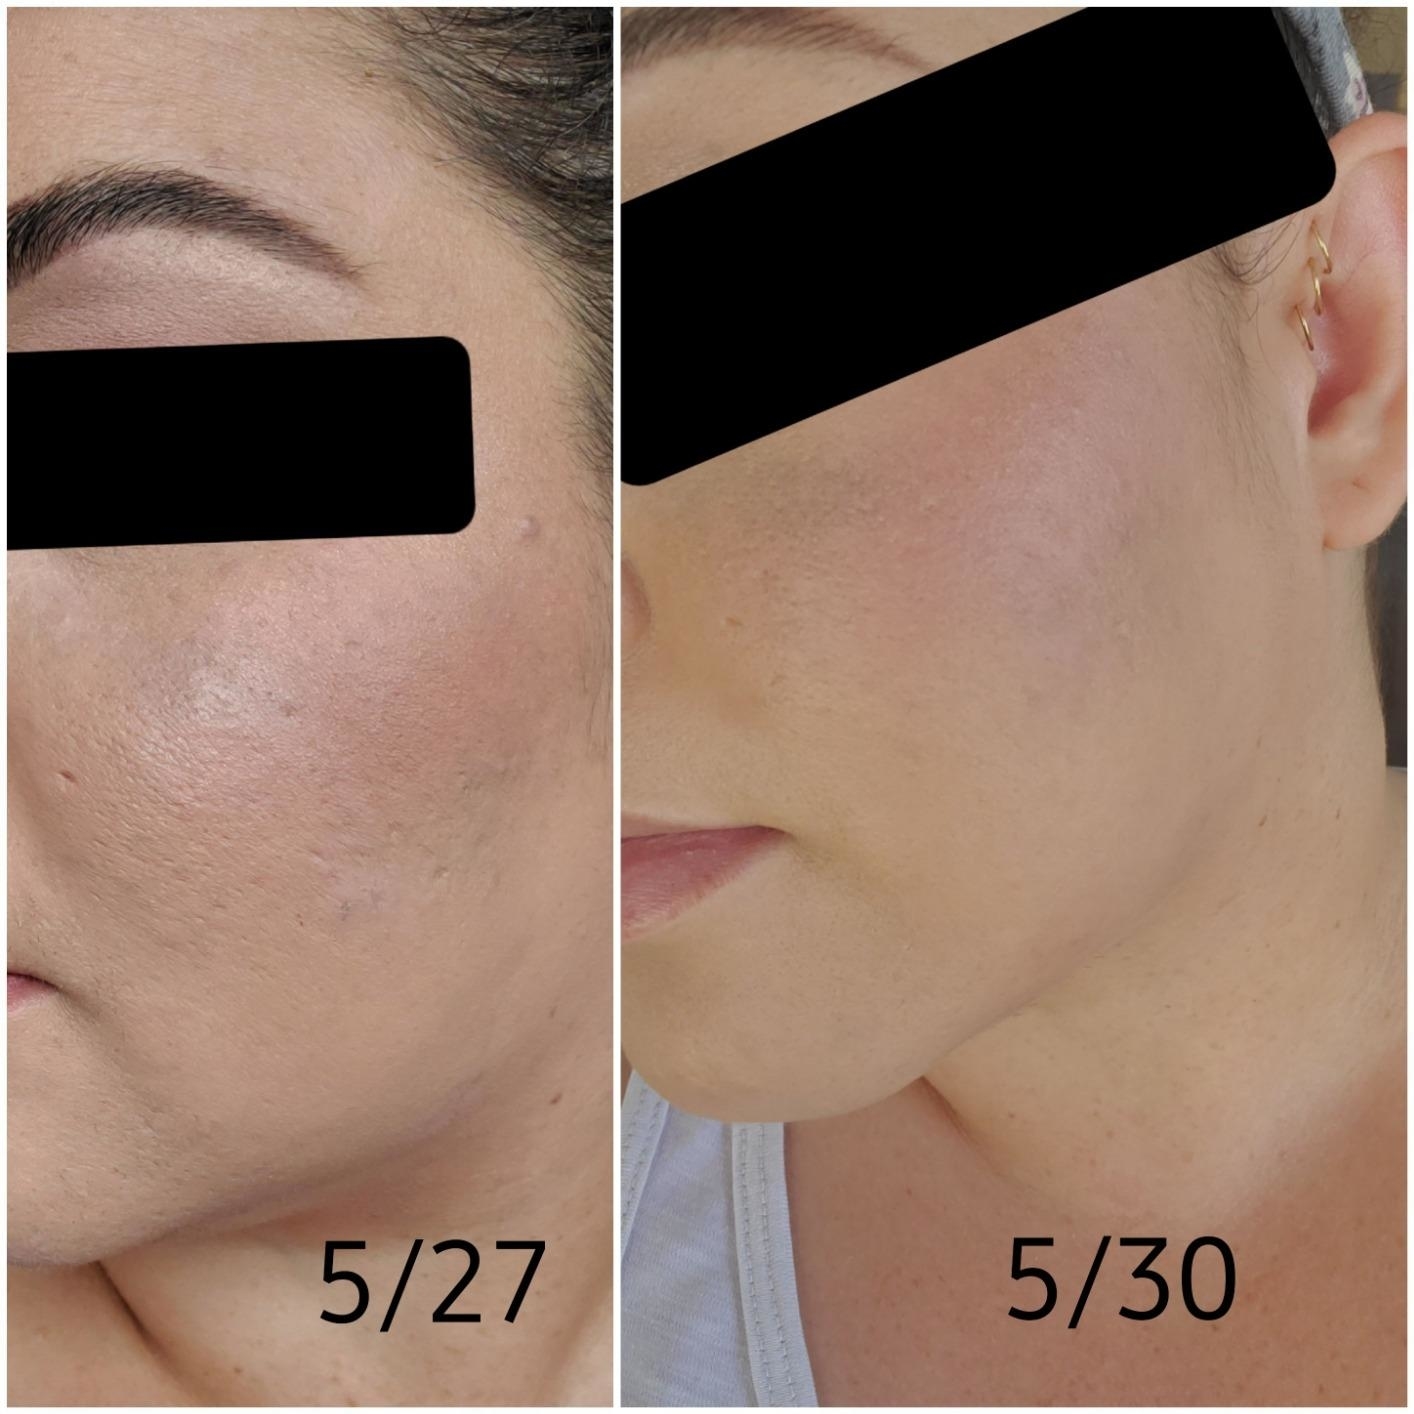 Before and after comparison of a person&#x27;s skin treatment, results visible, dated 5/27 and 5/30 showing visibly reduced pores and less blackheads